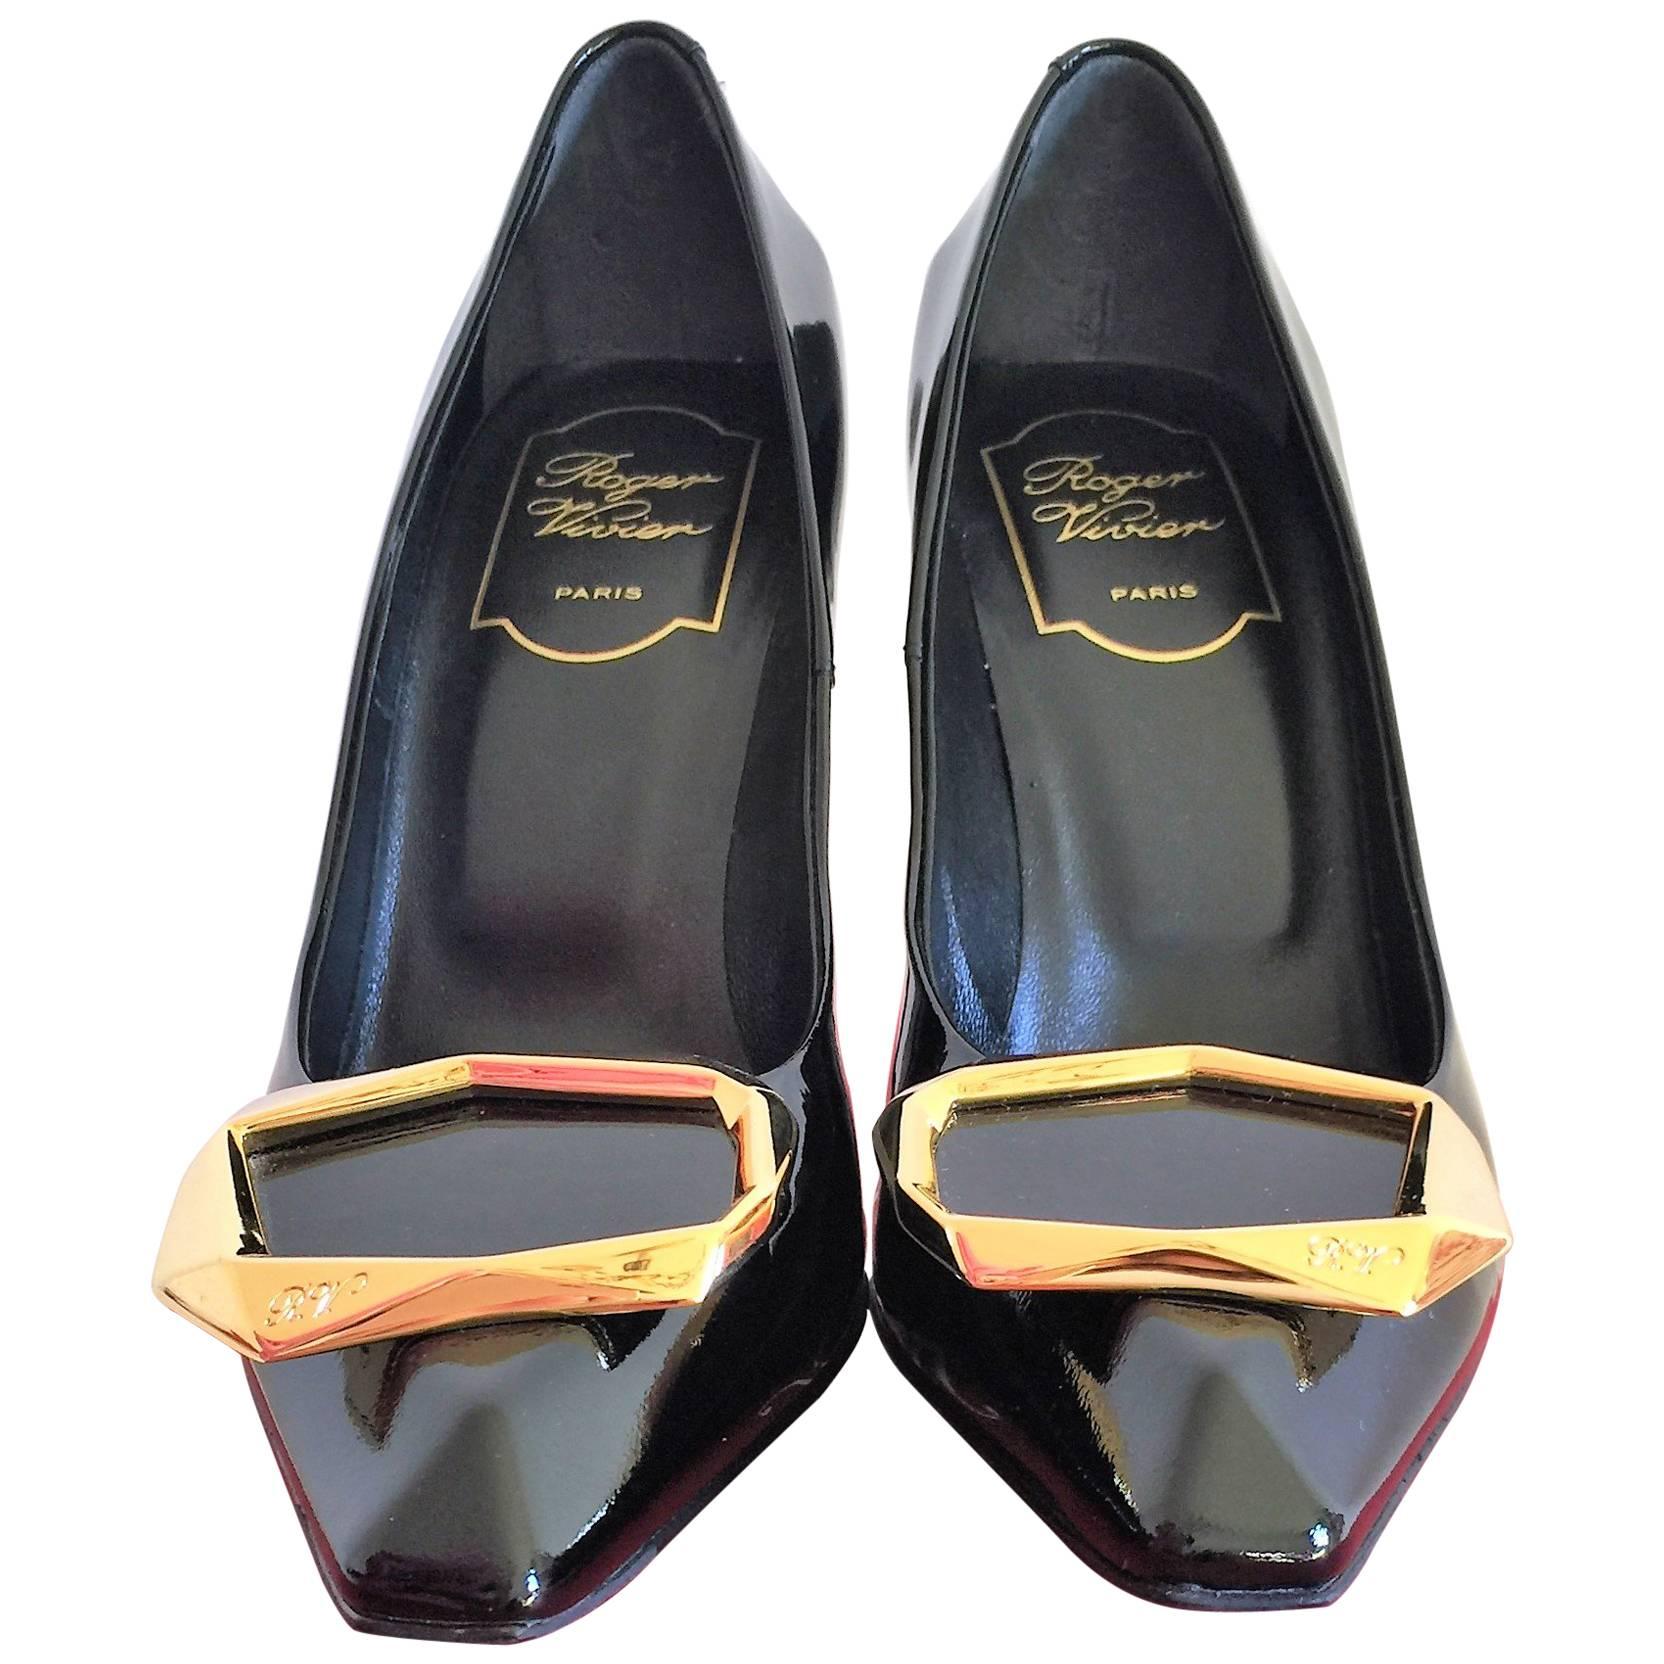 Roger Vivier Black Patent Leather Shoes Size 6.5, Heel Shoes in perfect status For Sale